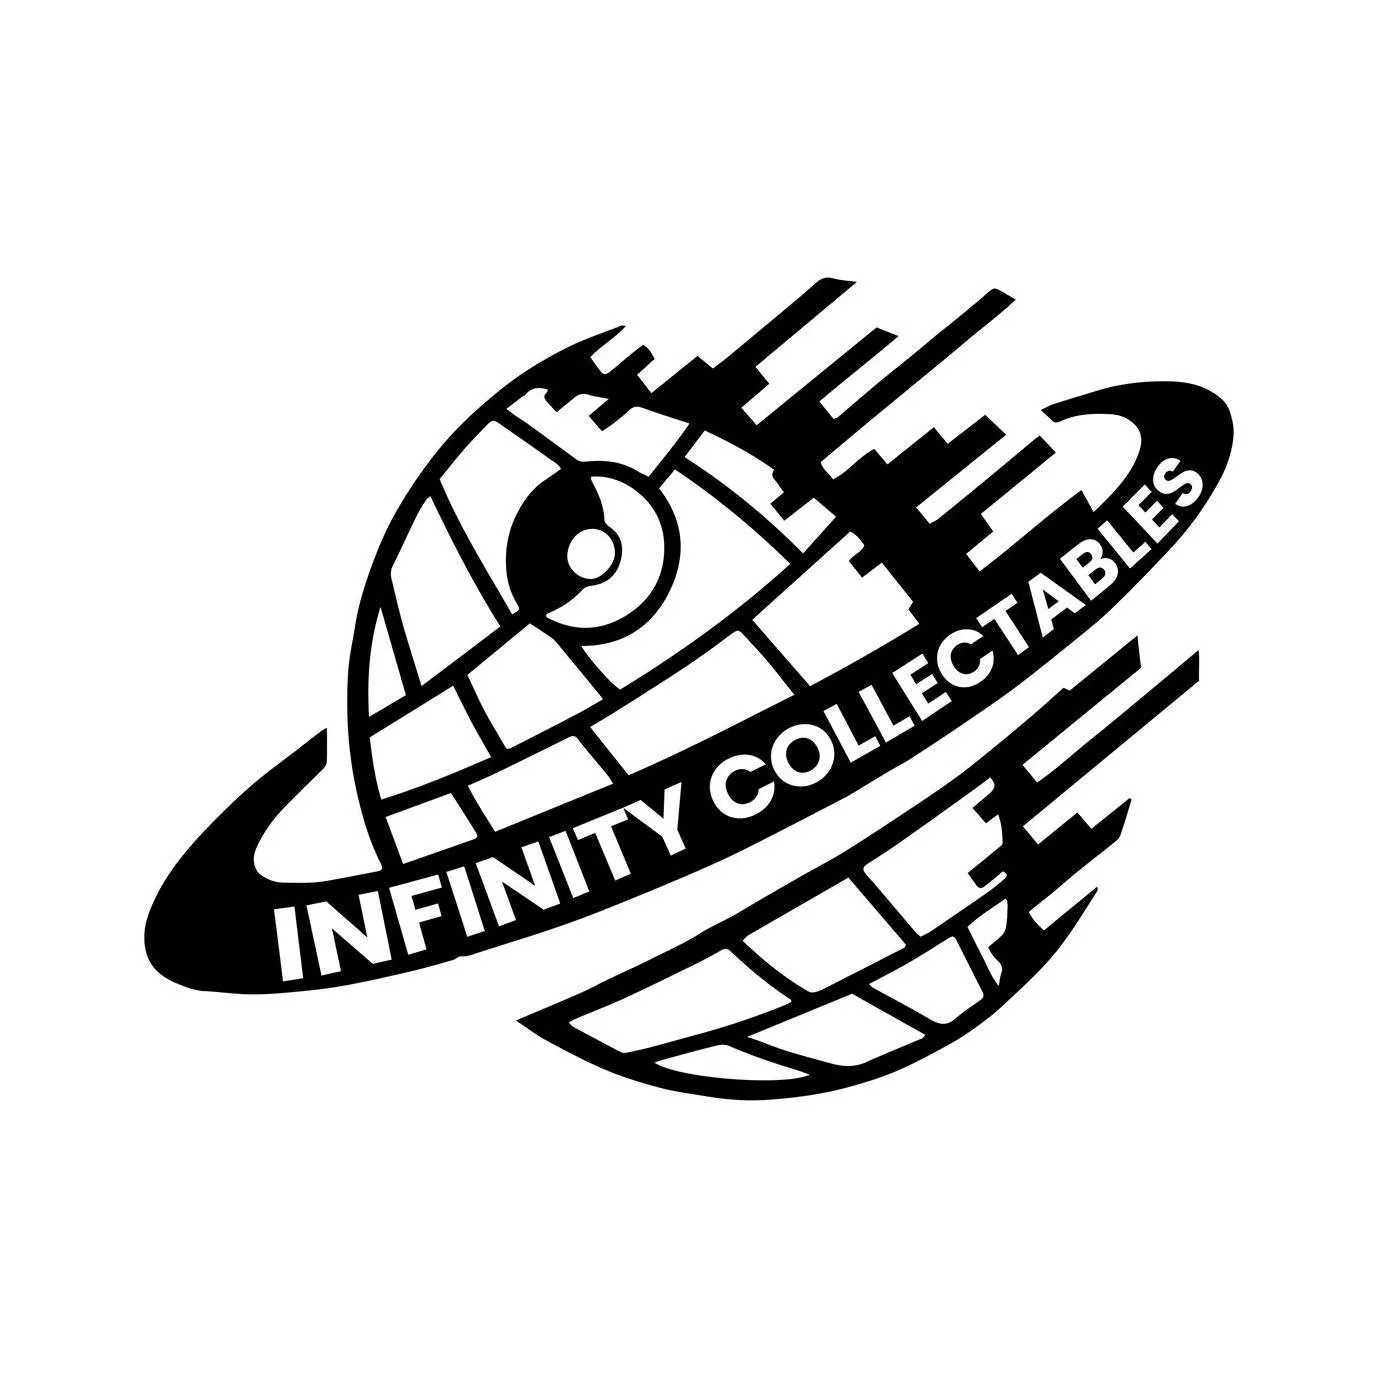 Take Advantage: Up To 15% Saving At Infinity Collectables